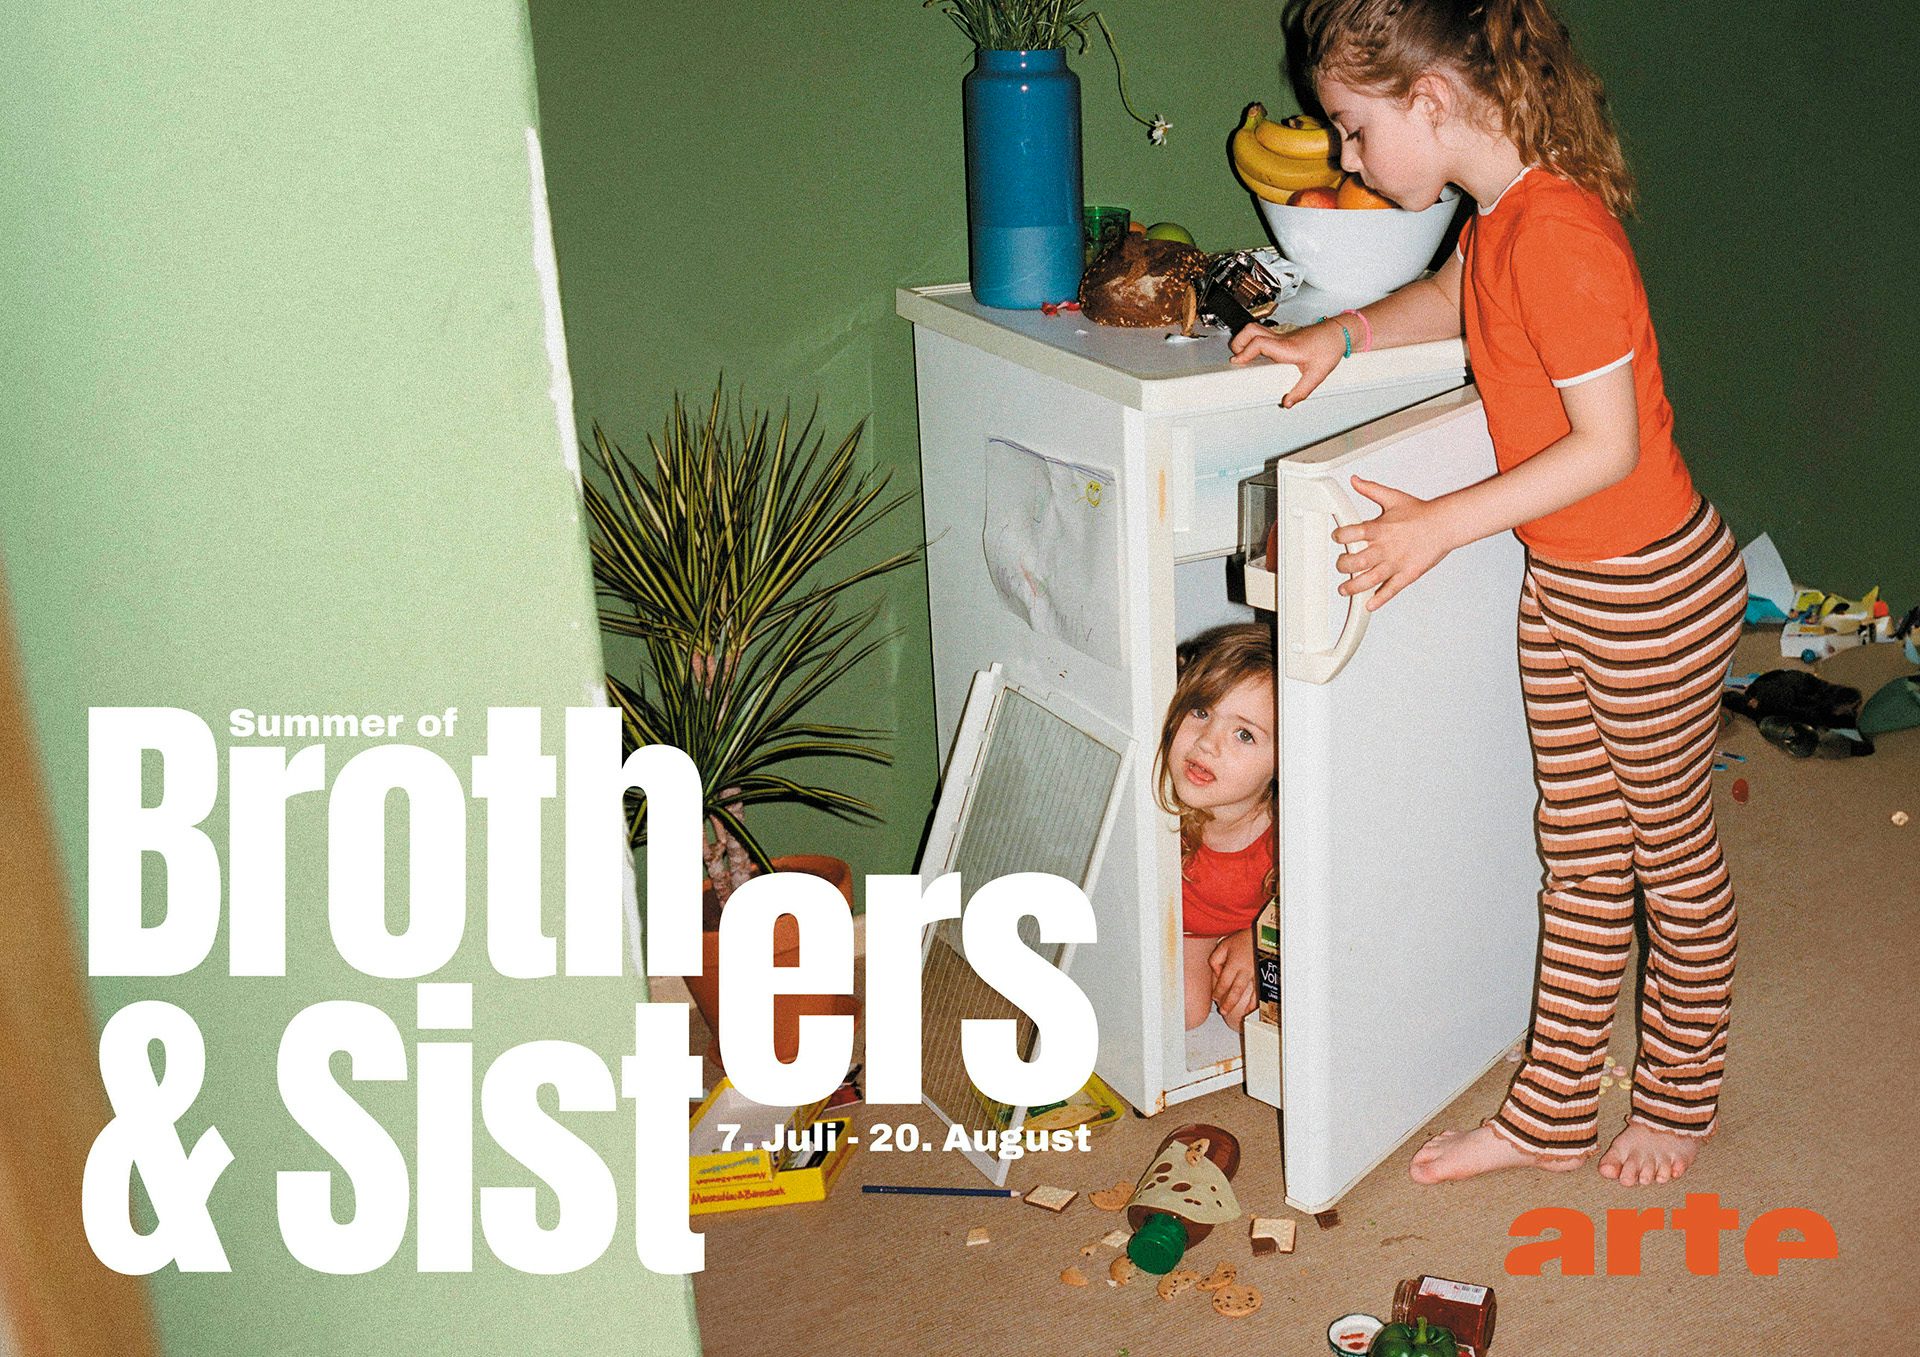 Image from Arte's Brothers and Sisters campaign, showing a photo of a child in an orange t-shirt and striped leggings appearing to shut another child in a fridge. The letters 'er' are split between the words 'Brothers' and 'Sisters'